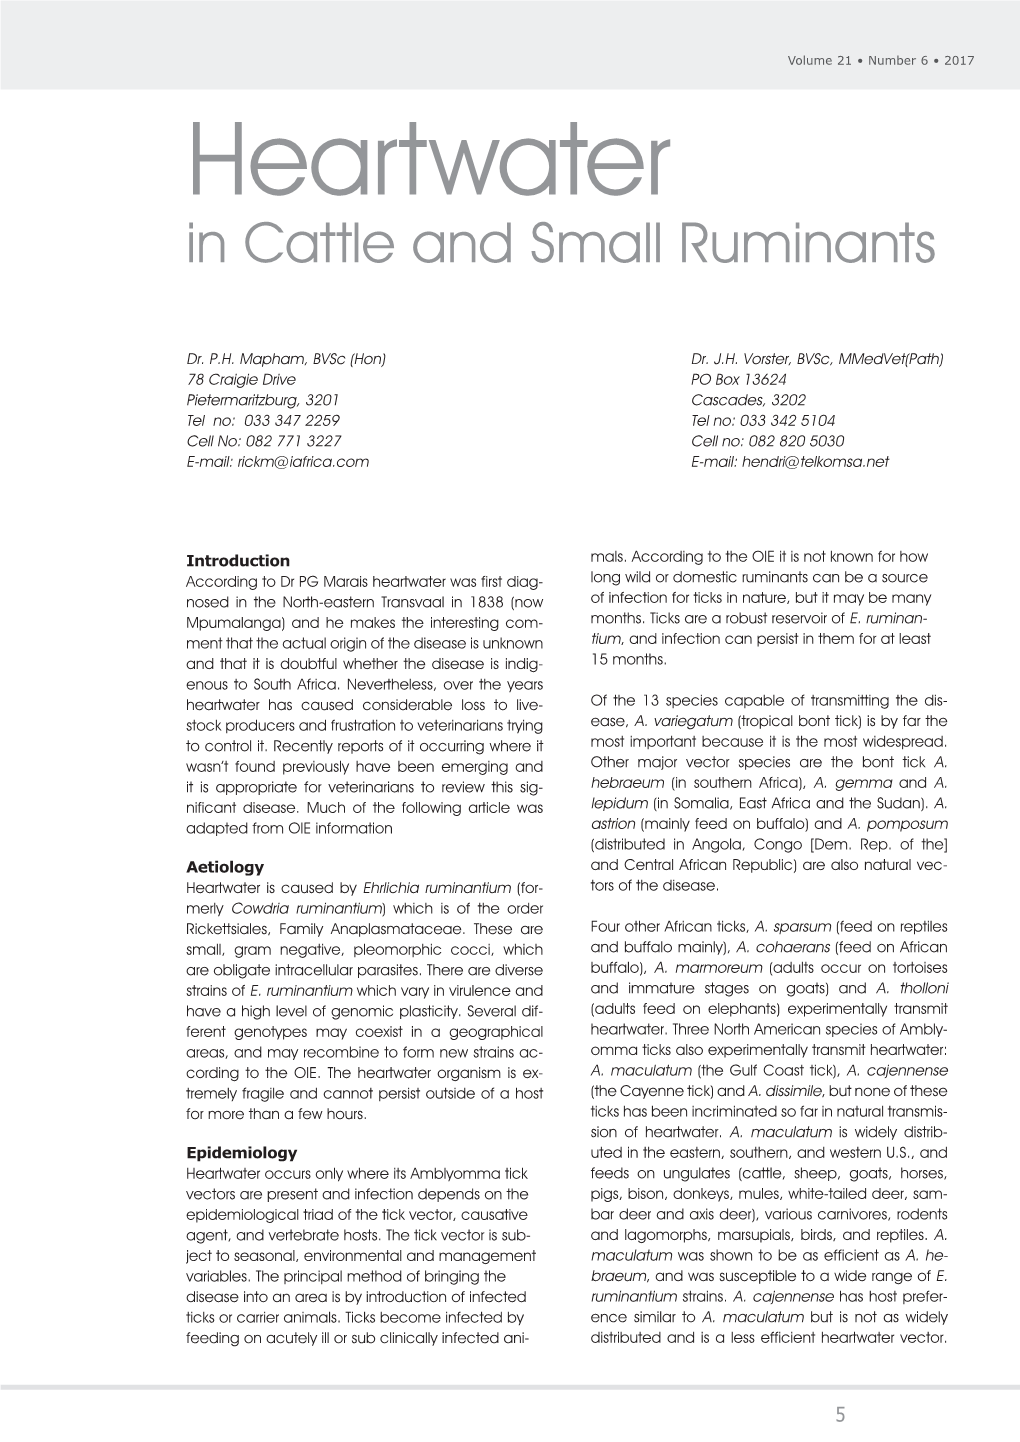 Heartwater in Cattle and Small Ruminants